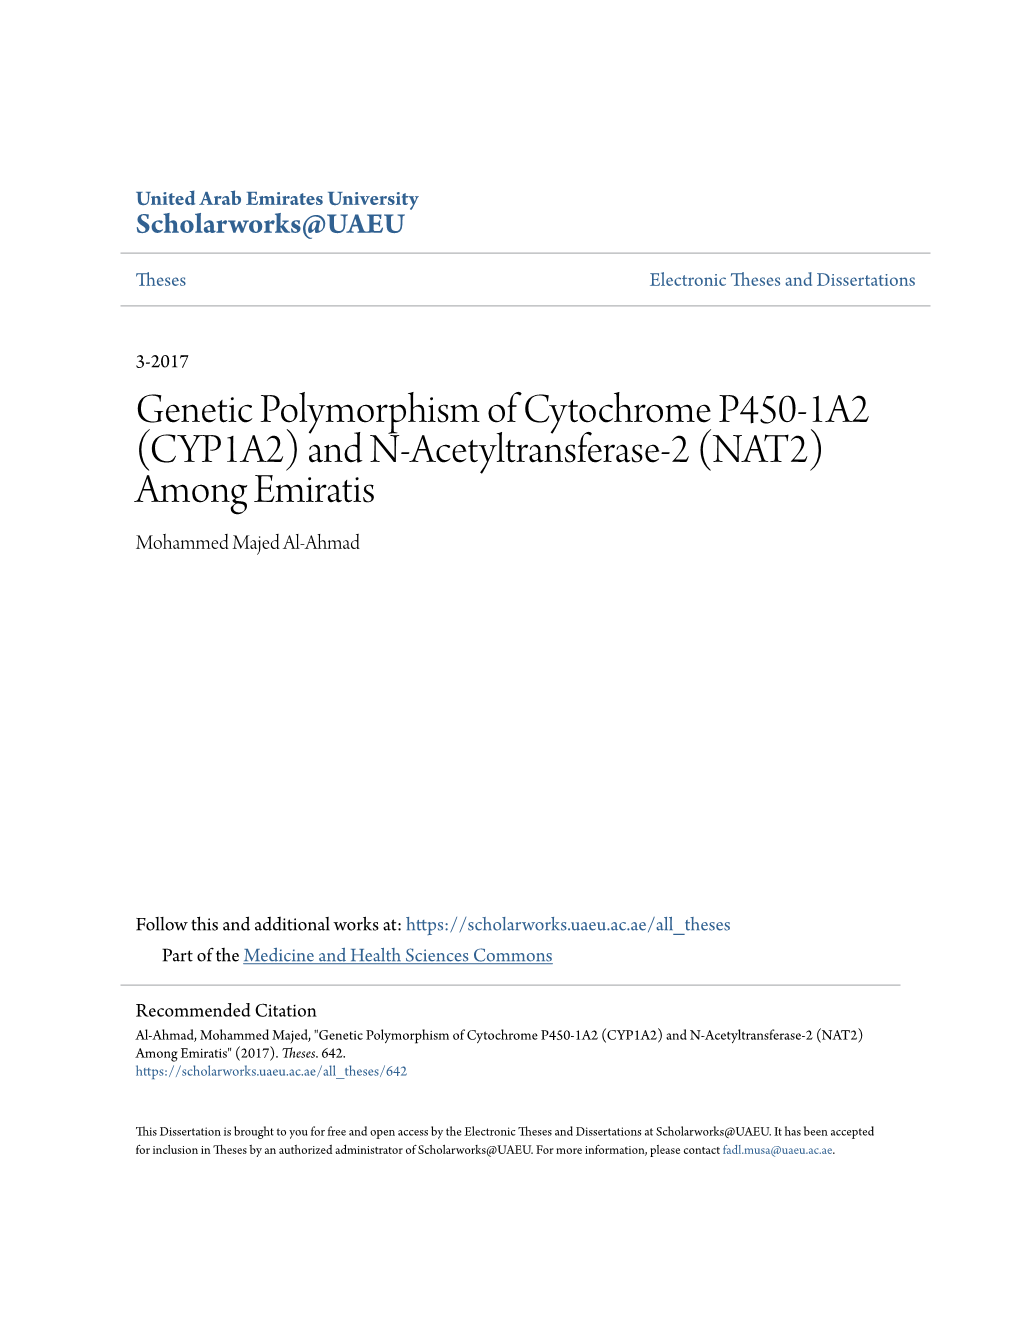 Genetic Polymorphism of Cytochrome P450-1A2 (CYP1A2) and N-Acetyltransferase-2 (NAT2) Among Emiratis Mohammed Majed Al-Ahmad